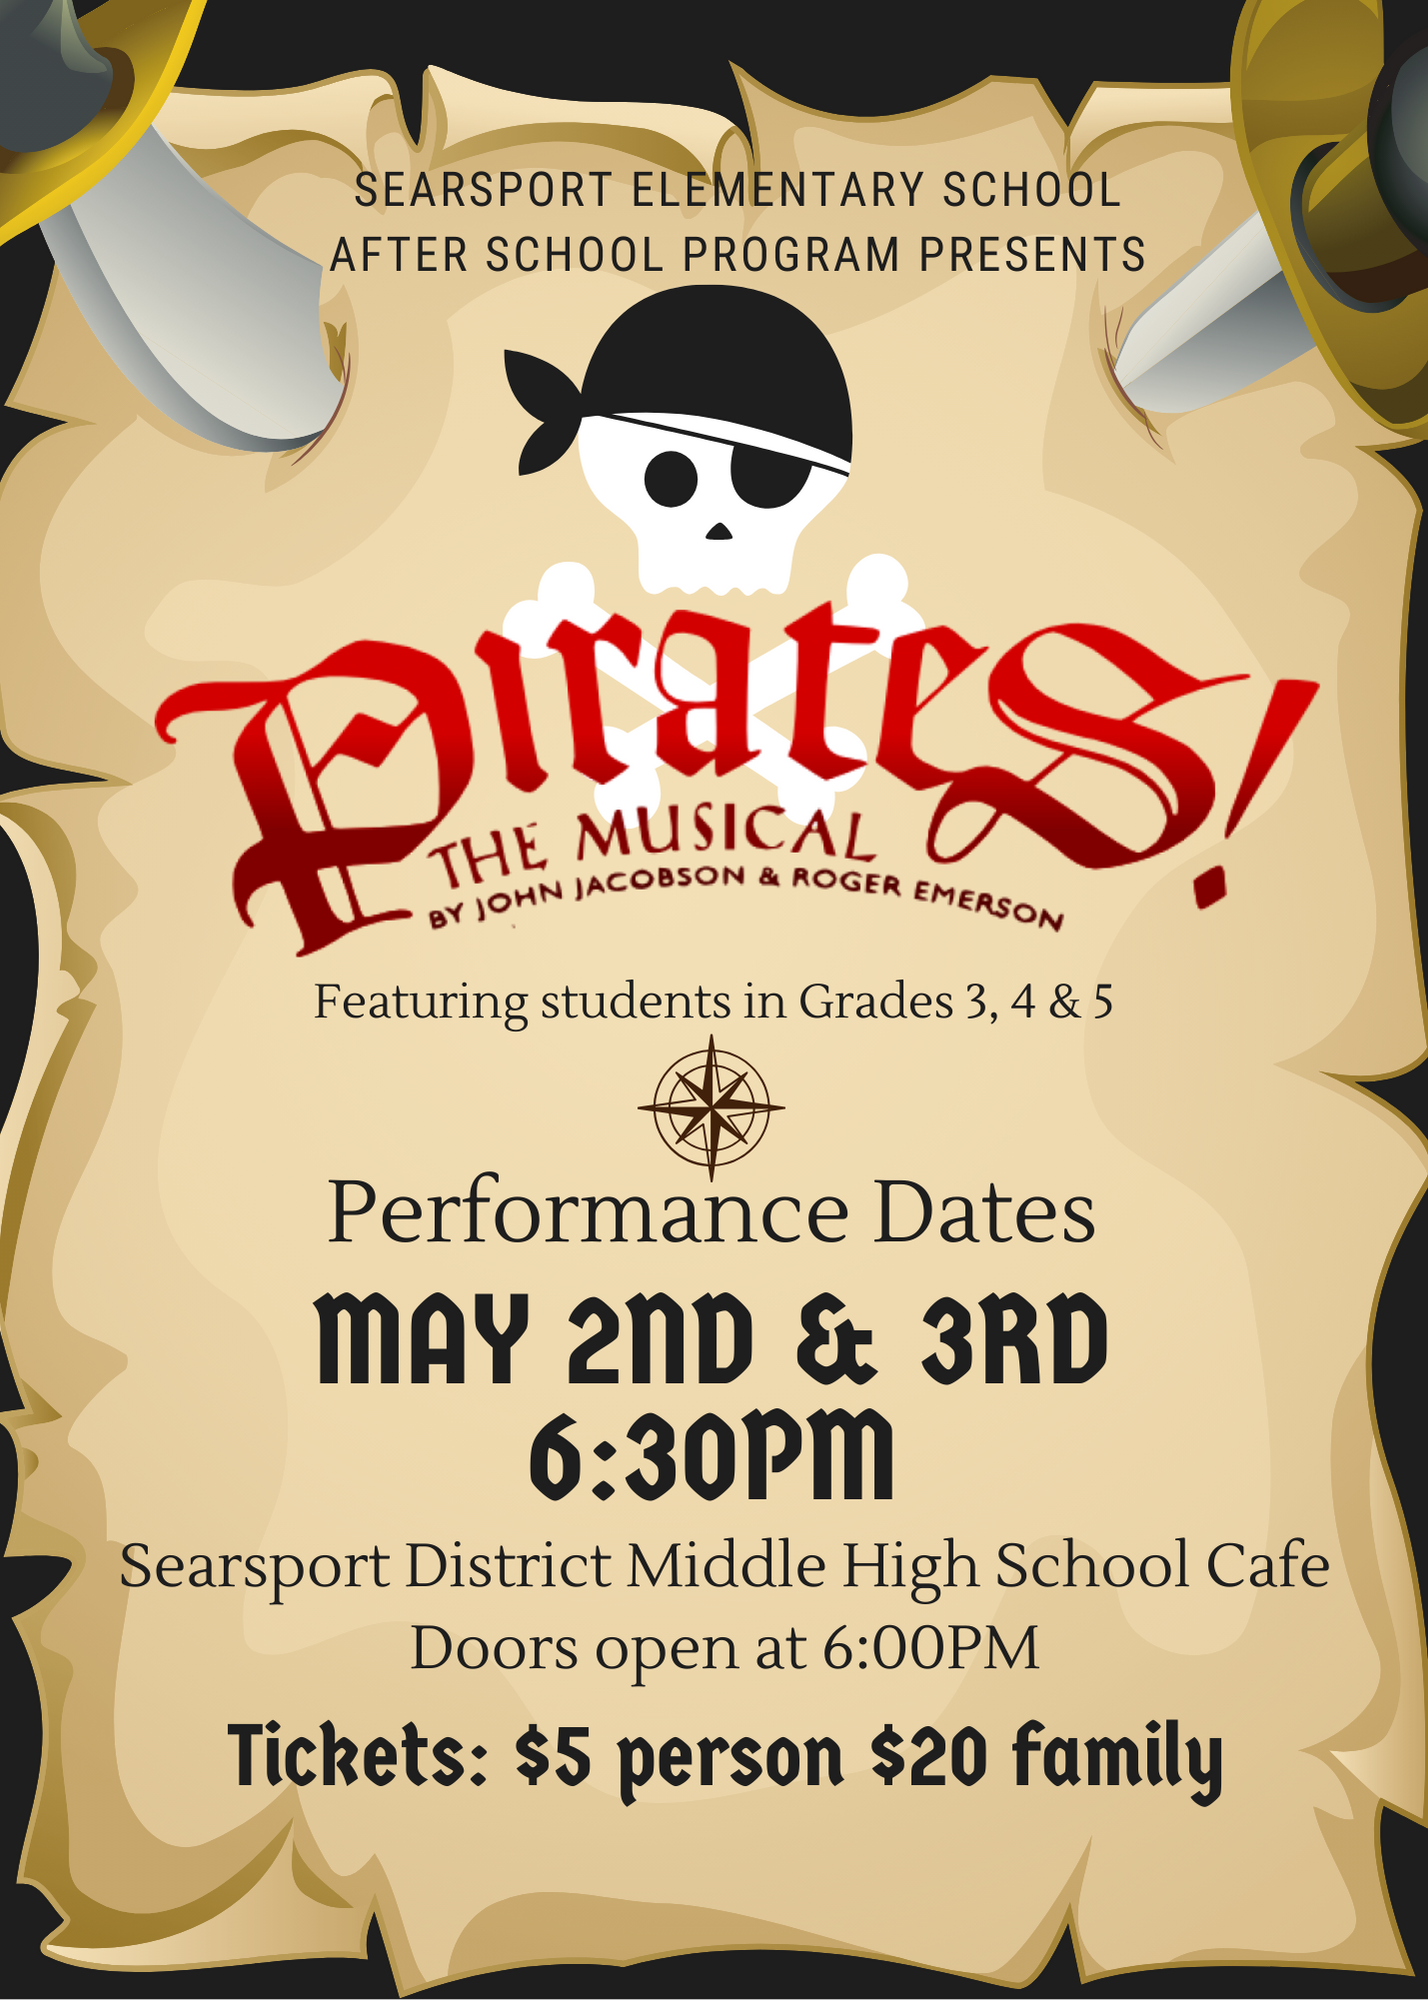 Searsport Elementary School After School Program presents Pirates the Musical by John Jacobson and Roger Merson.  Featuring students in Grades 3, 4, & 5.  May 2nd and 3rd at 6:30 PM at the Searsport District Middle/High School Cafetorium.  Doors open @ 6 PM. Tickets: $5/person or $20/family.